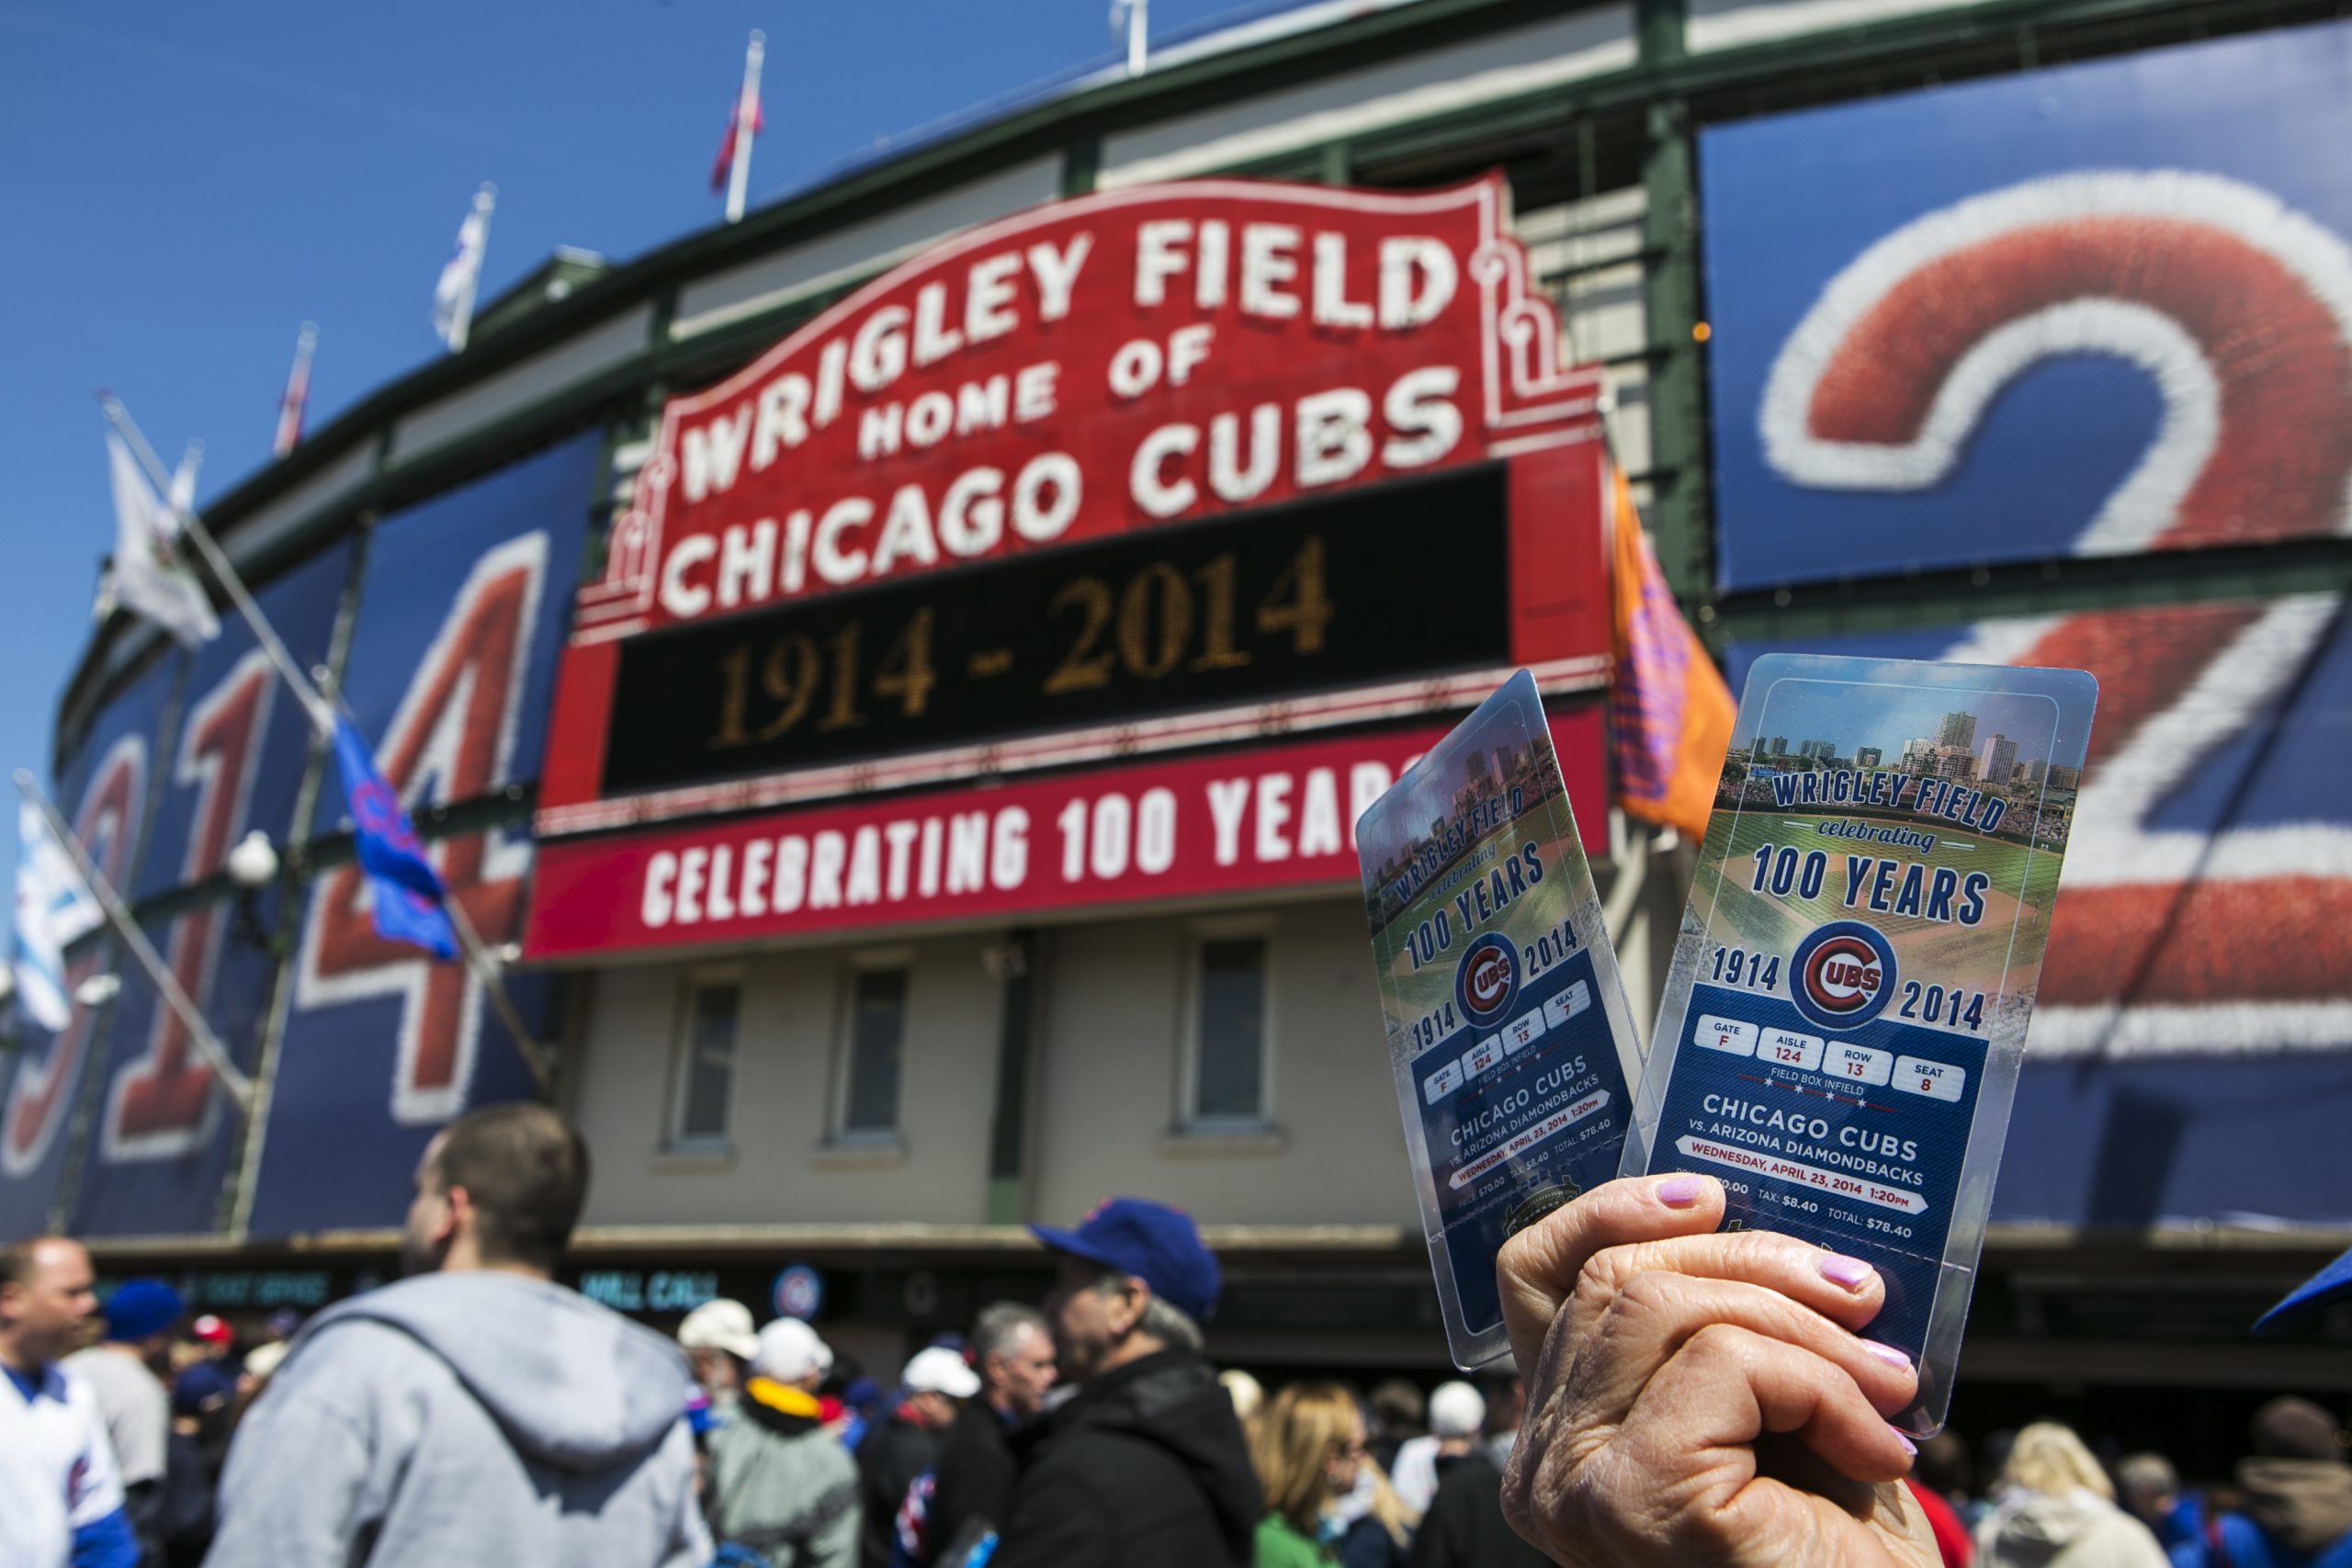 How to get free Chicago Cubs tickets